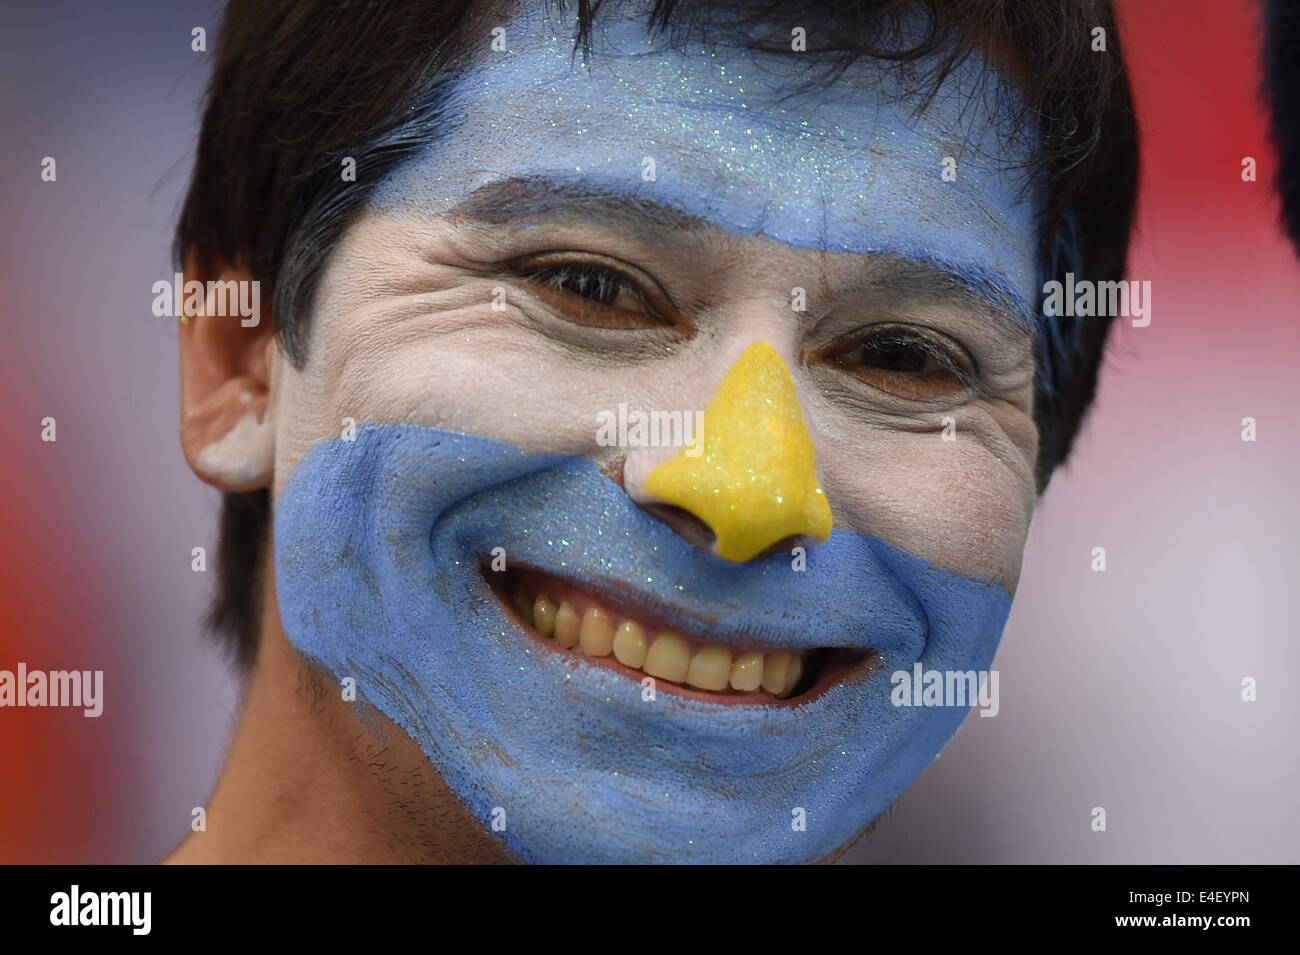 Sao Paulo, Brazil. 09th July, 2014. Supporter of Argentina cheers before the FIFA World Cup 2014 semi-final soccer match between the Netherlands and Argentina at the Arena Corinthians in Sao Paulo, Brazil, 09 July 2014. Photo: Marius Becker/dpa/Alamy Live News Stock Photo